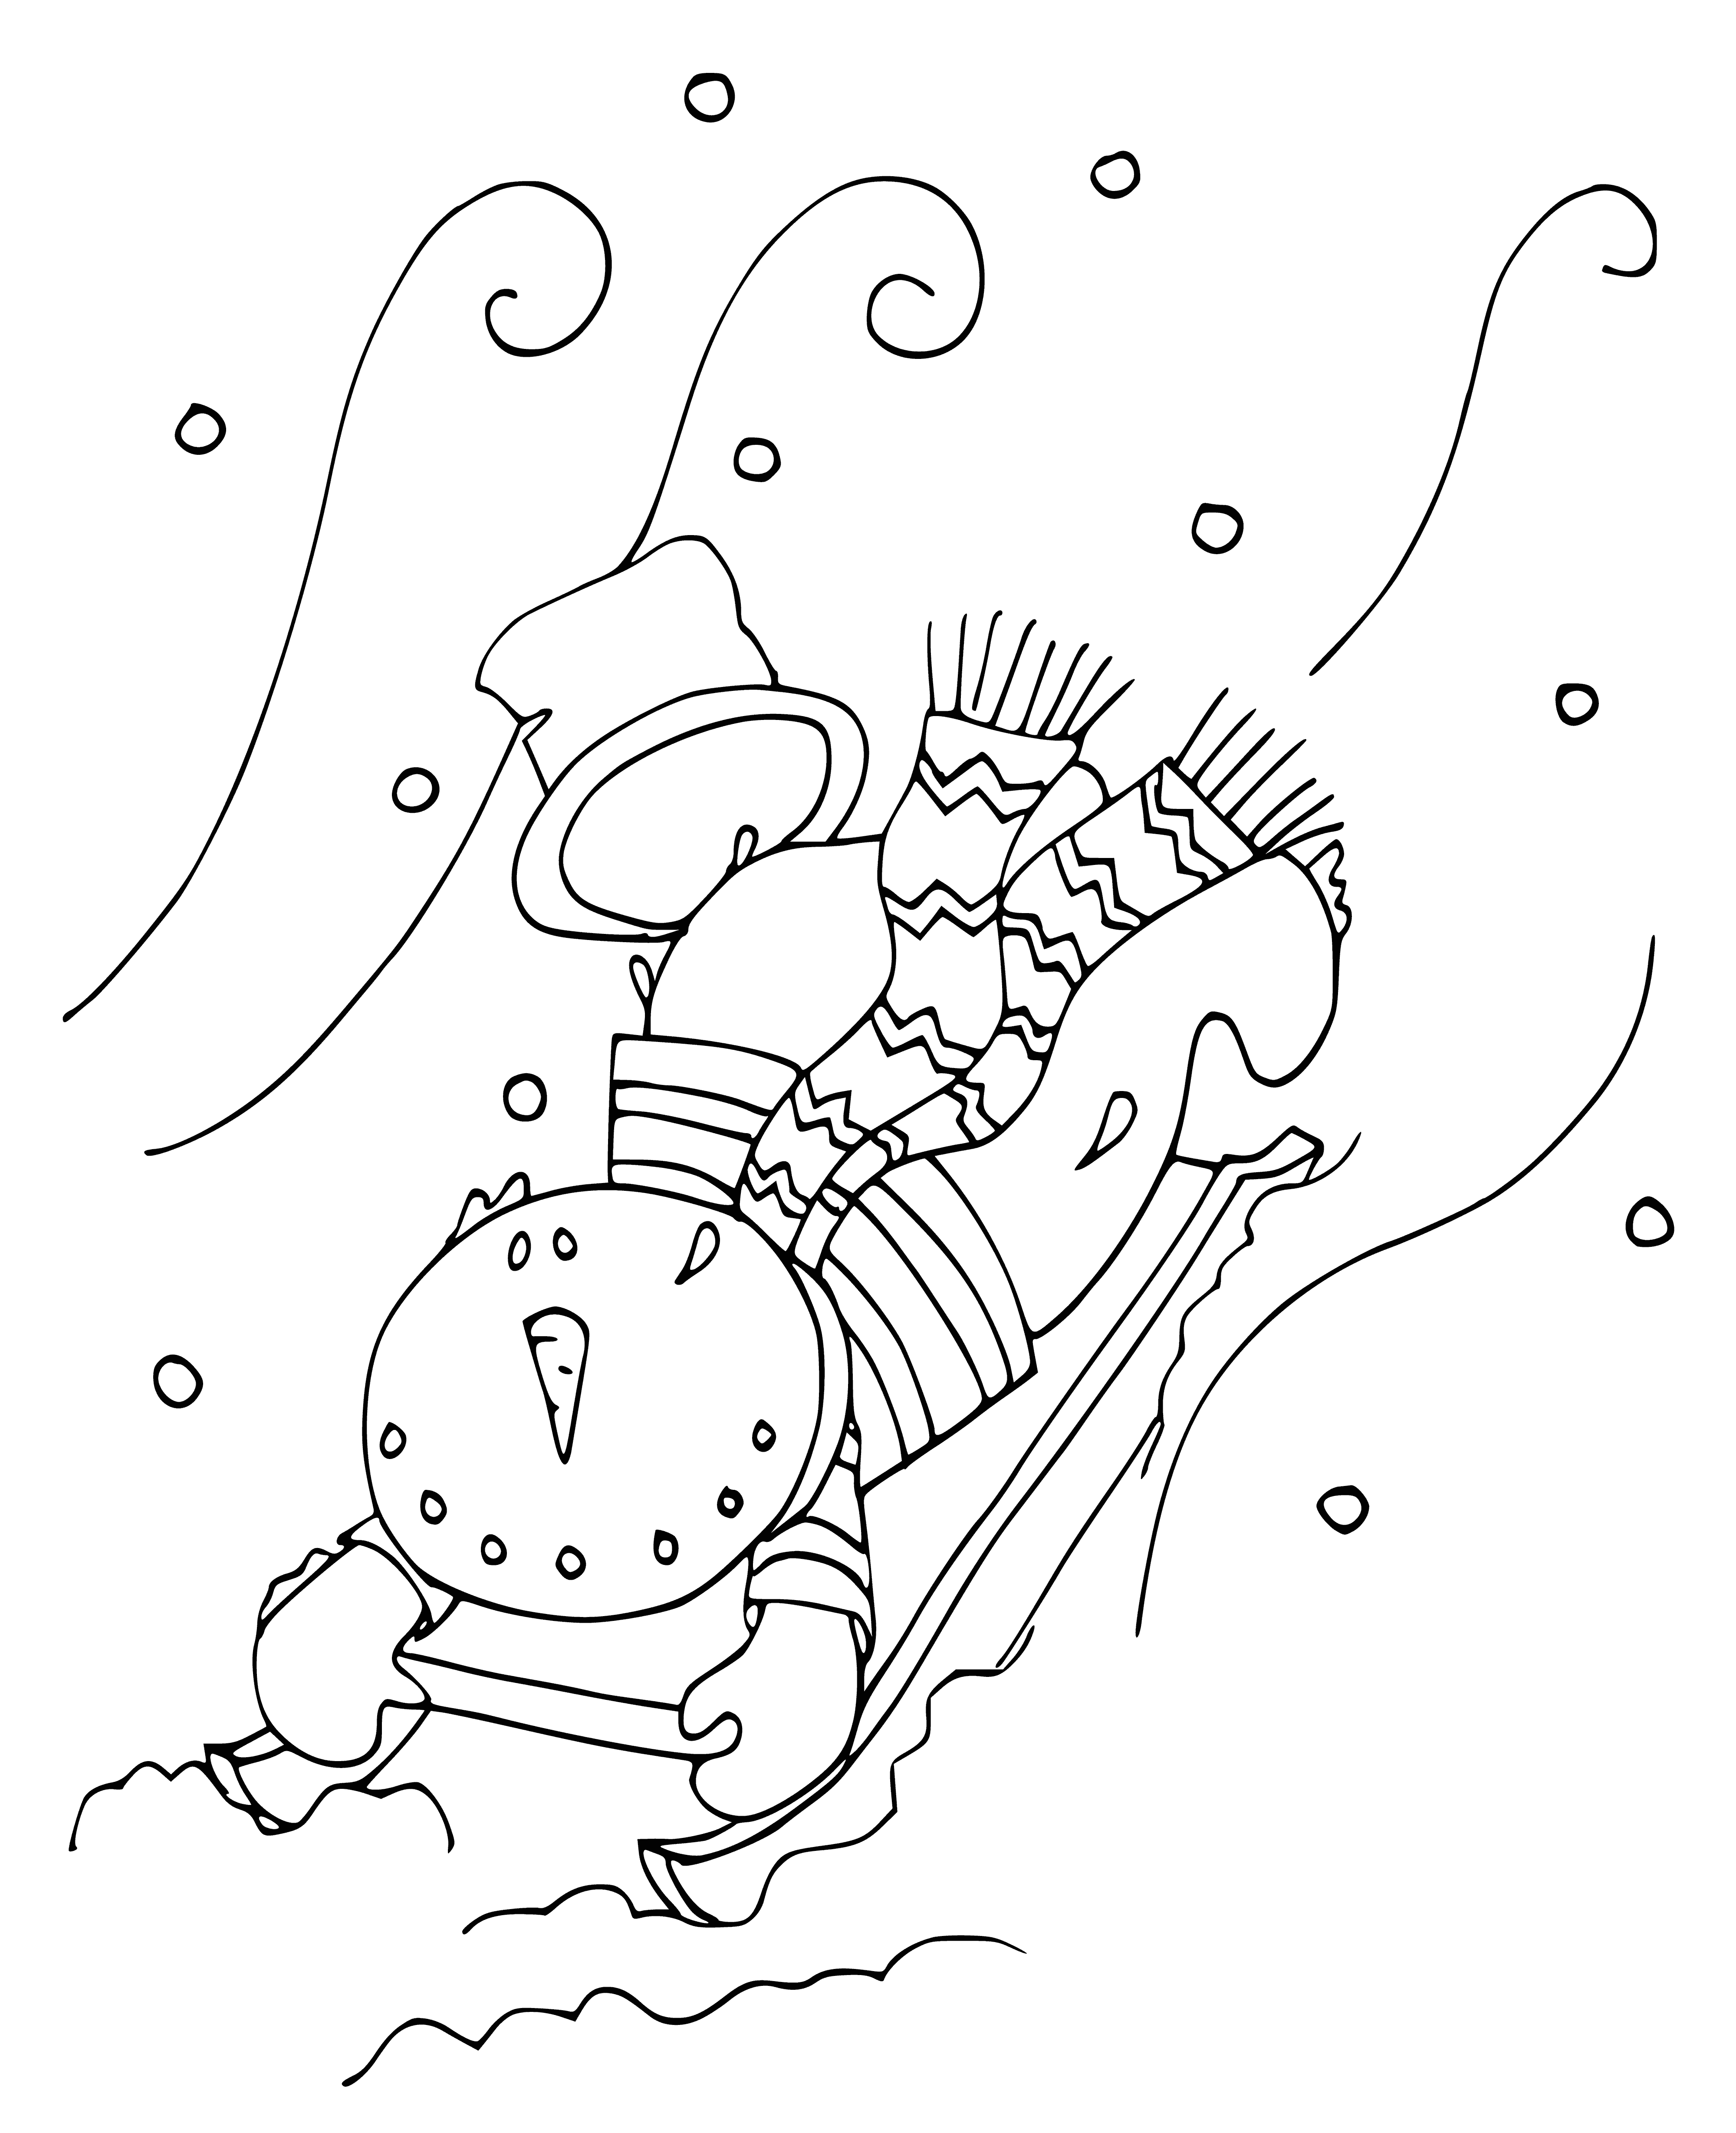 He is laughing and having a great time.

The snowman is rolling down the slide and laughing with joy. #WinterFun